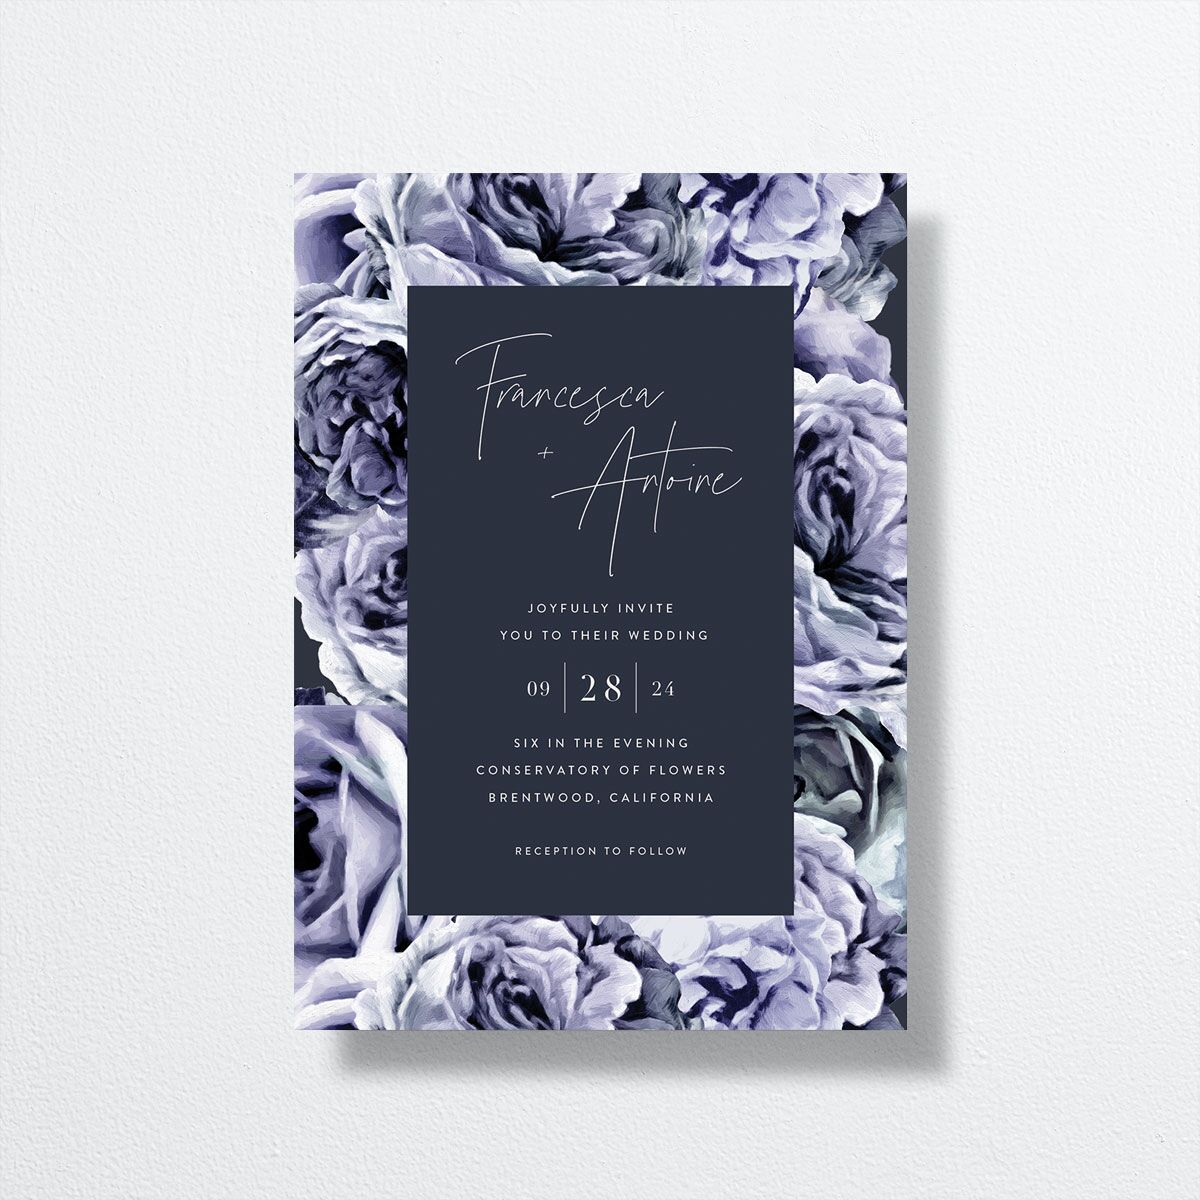 Rose Garden Wedding Invitations by Vera Wang front in blue